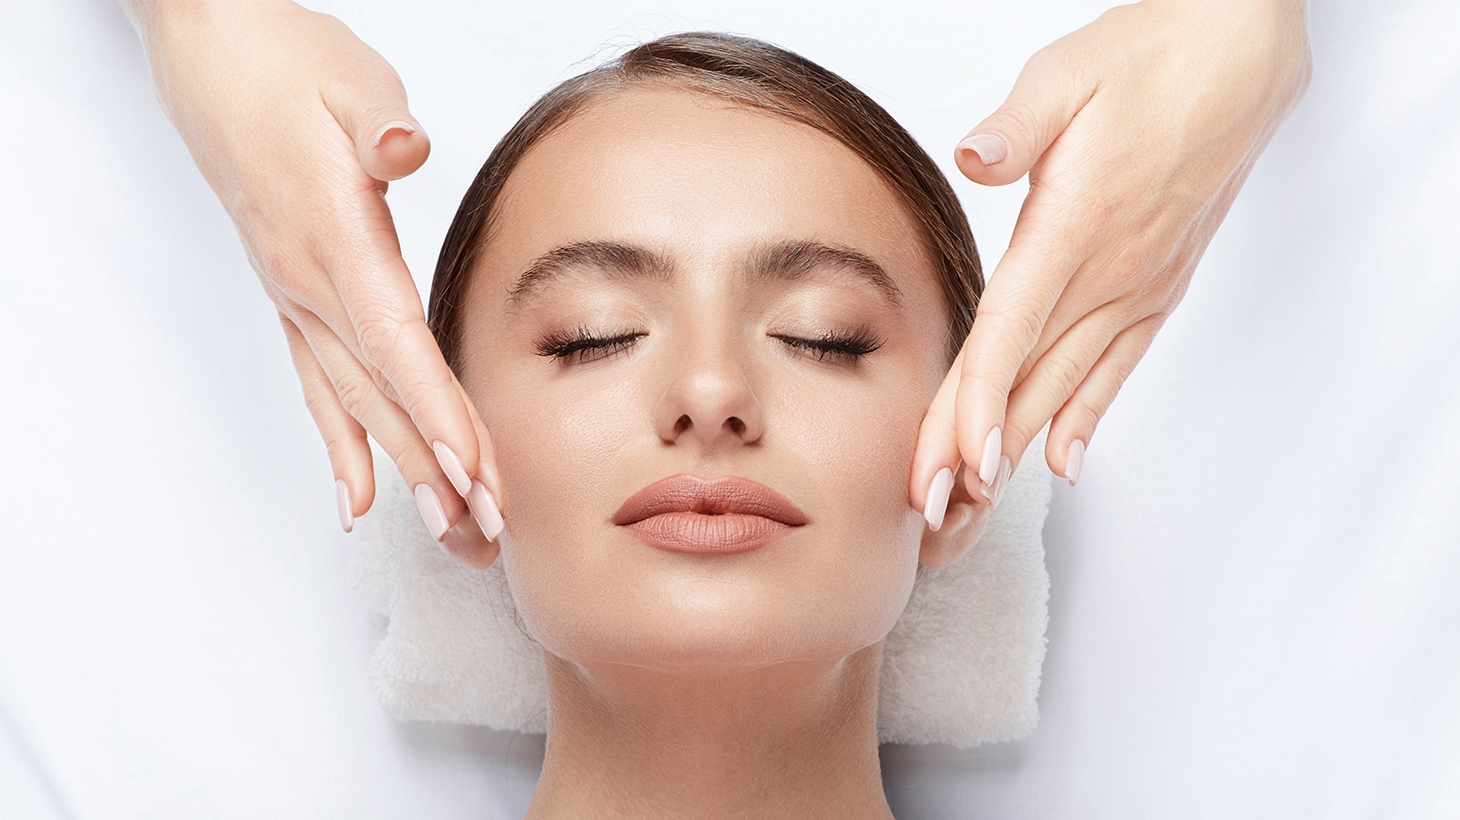 Massage And Facial Pamper Packages At Luxury Calamvale Day Spa Scoopon